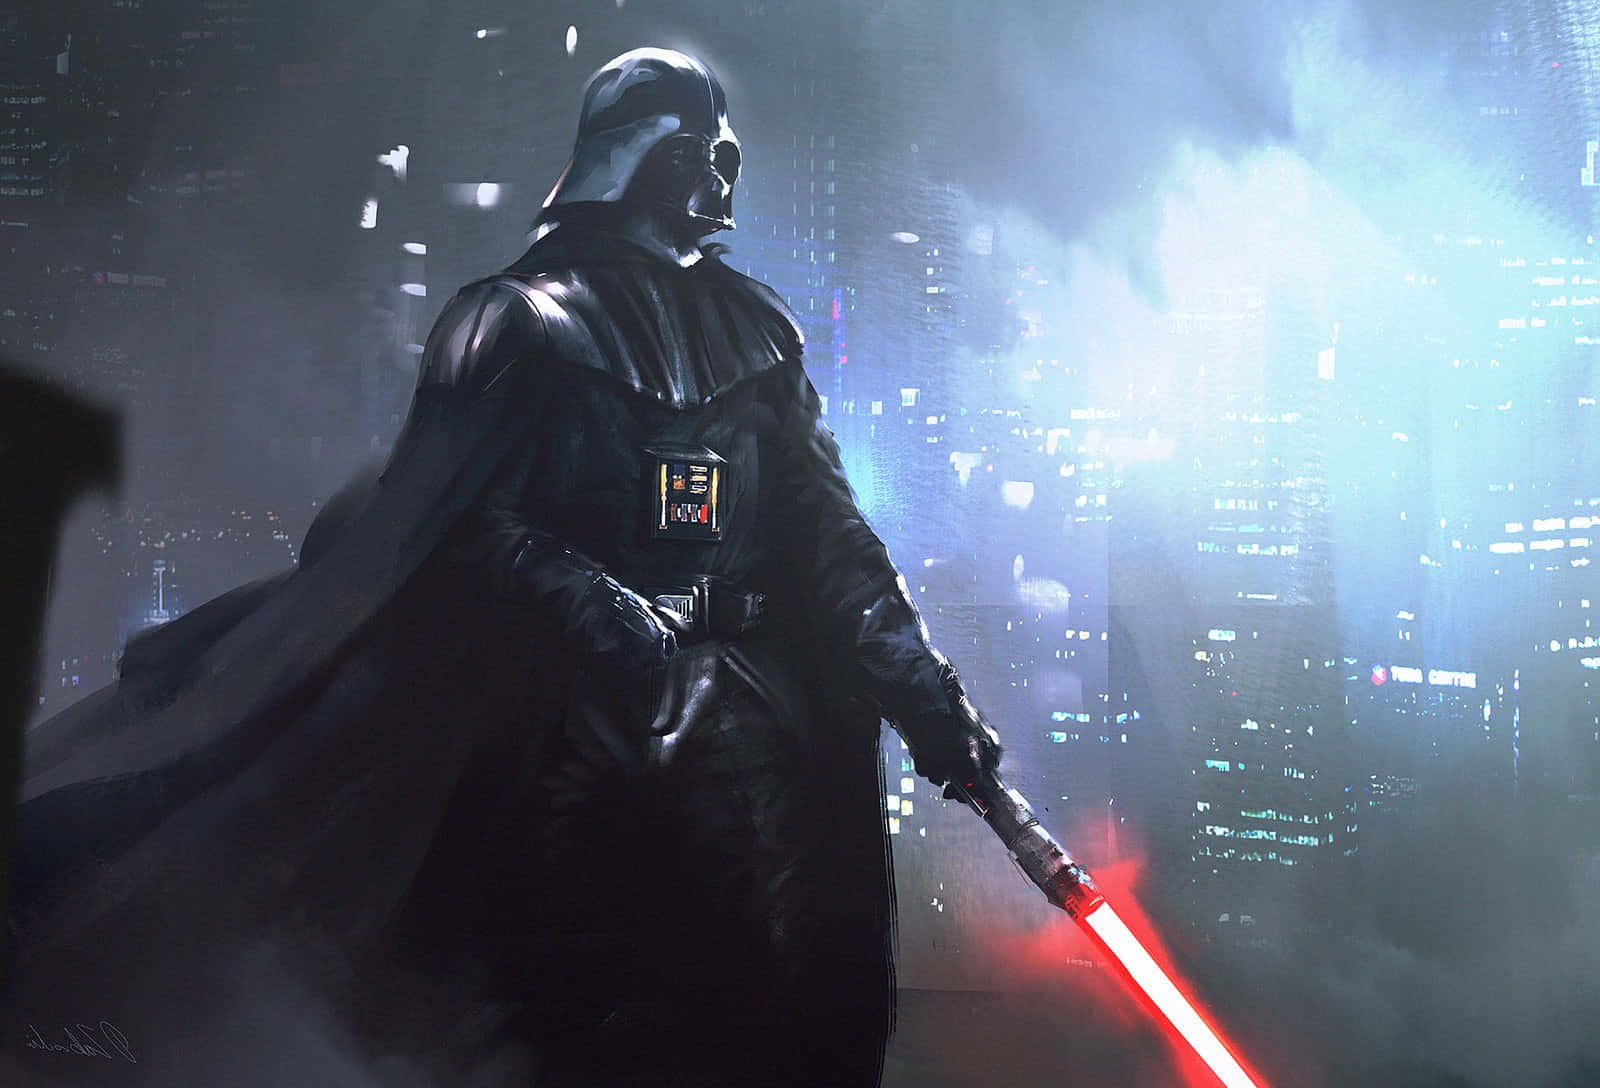 Darth Vader, one of the most iconic characters in history.